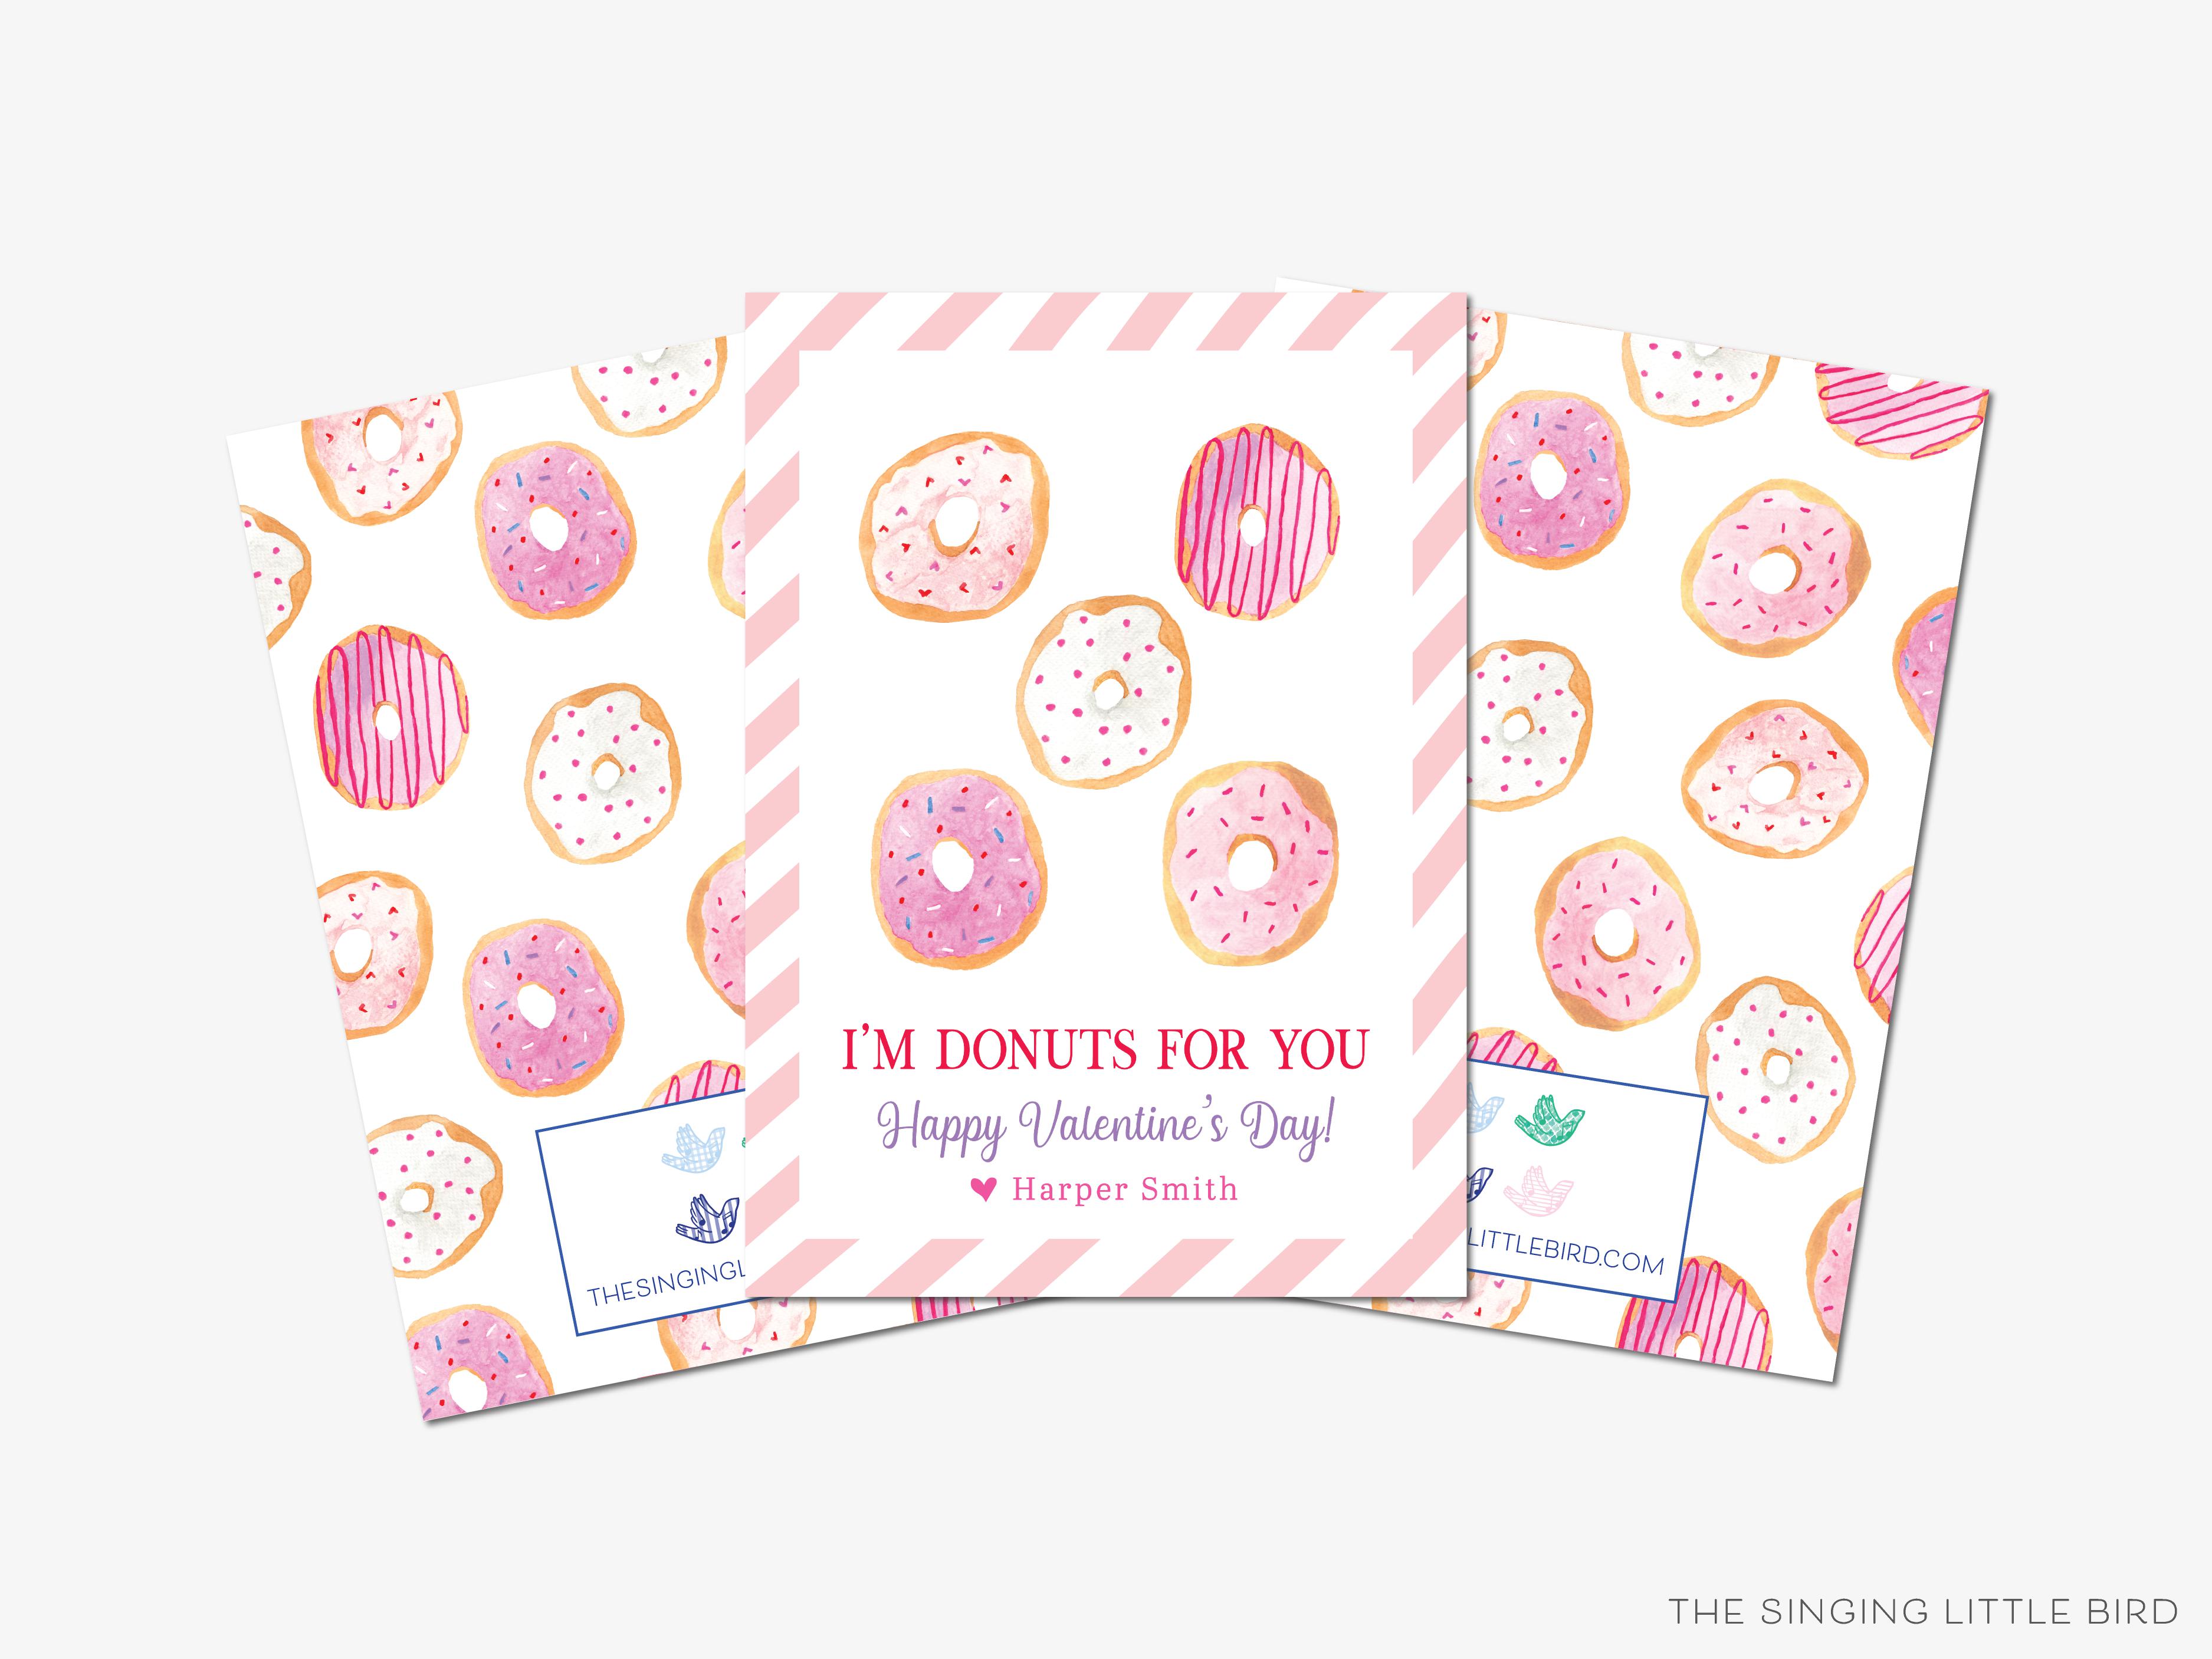 Donut Valentine's Day Cards-These personalized flat notecards are 3.5" x 4.875 and feature our hand-painted watercolor donuts, printed in the USA on 120lb textured stock. They come with white envelopes and make great Valentine's Day cards for kids and sweet tooth lovers in your life.-The Singing Little Bird